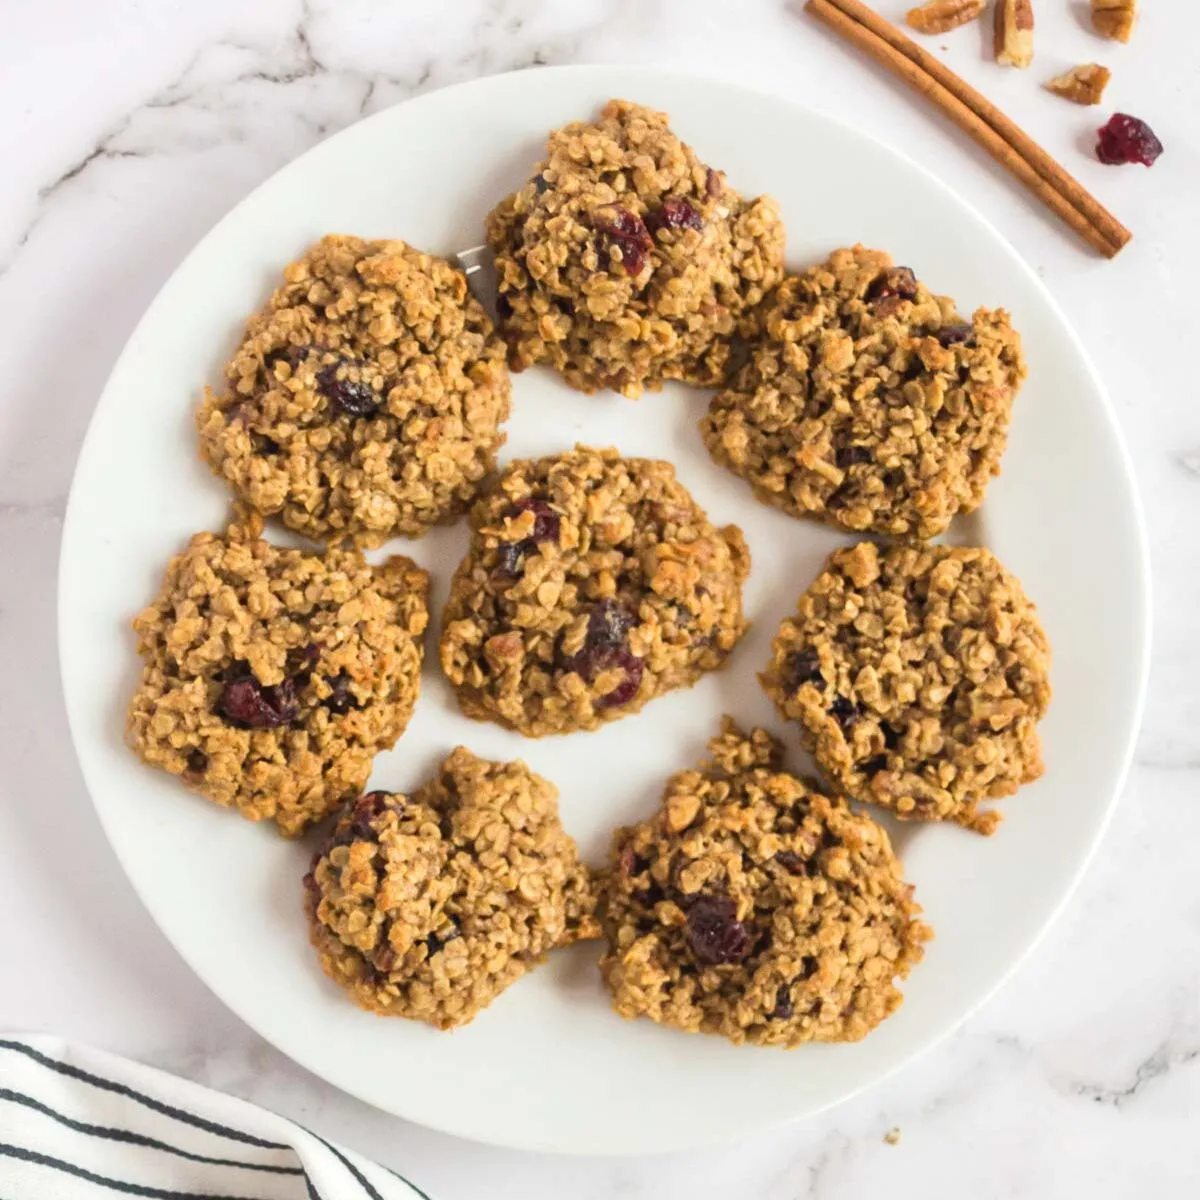 Oatmeal craisin pecan cookies on a plate